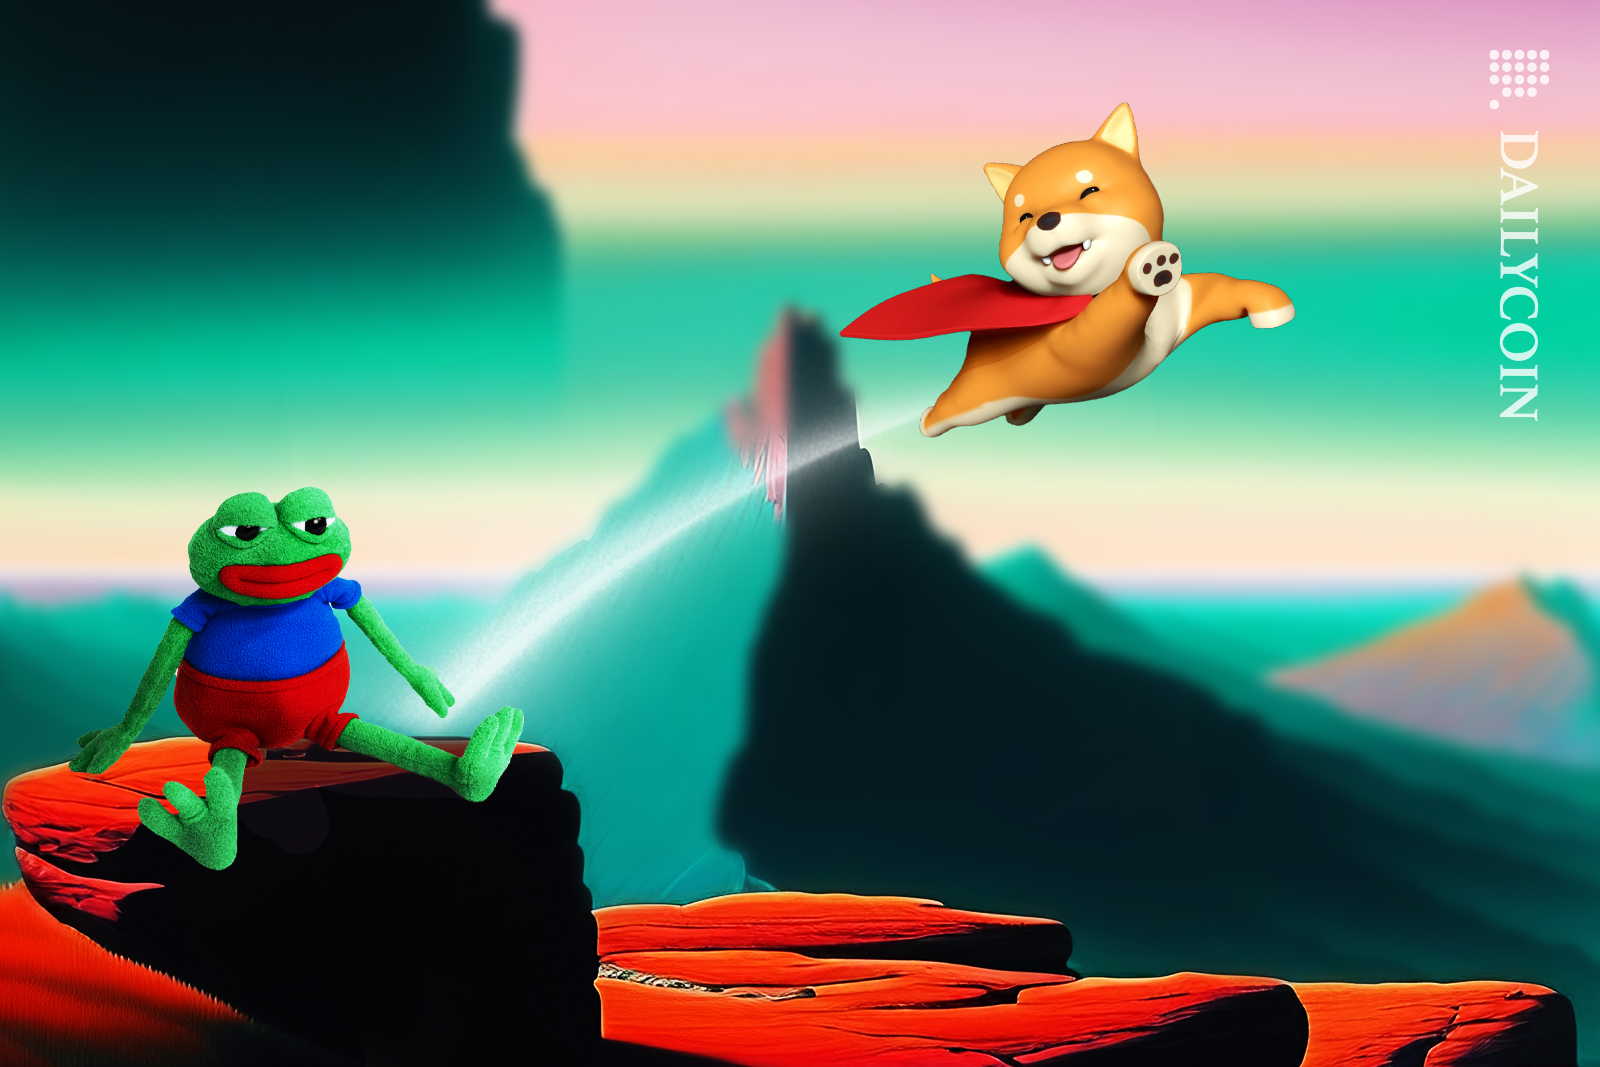 Pepe sitting on the edge of a cliff, looking depressed, Shiba Inu shooting like a star across the sky.